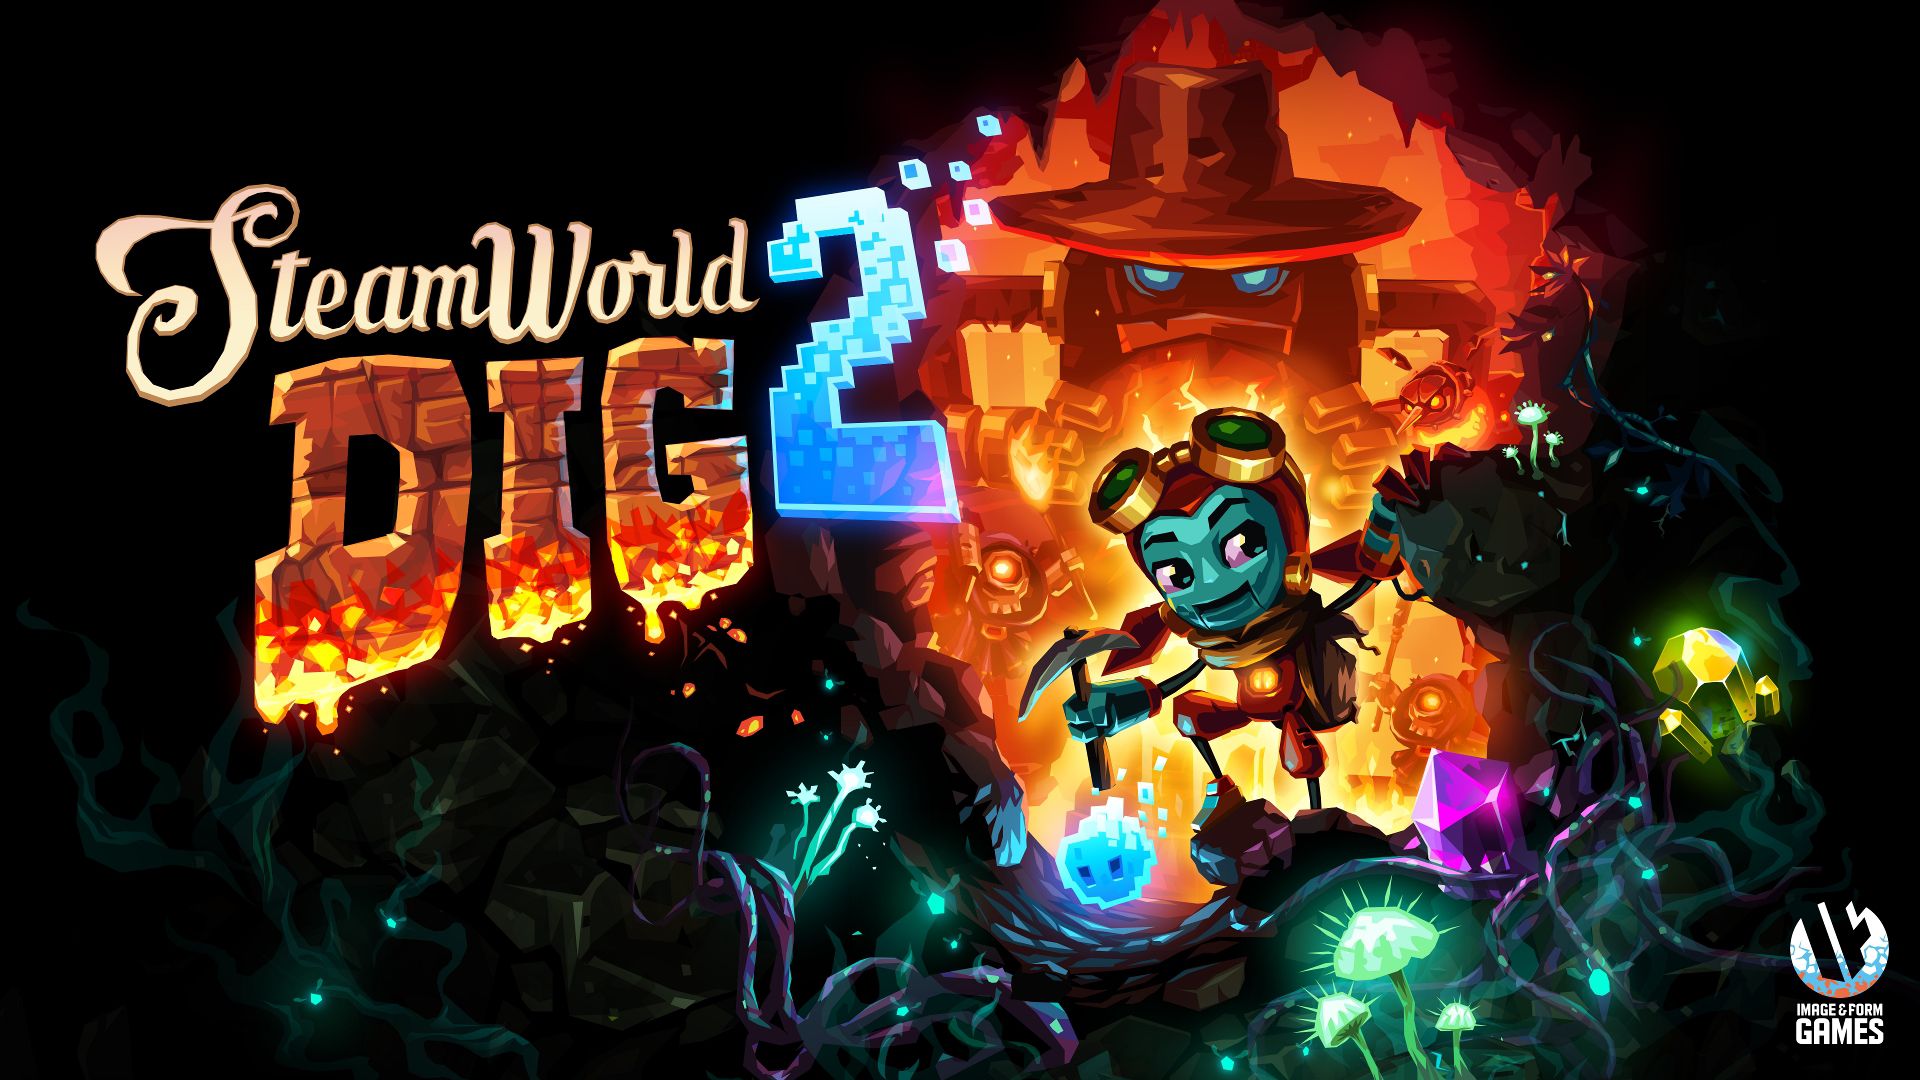 HD desktop wallpaper featuring the game SteamWorld Dig 2 with the robotic protagonist against a fiery underground backdrop.